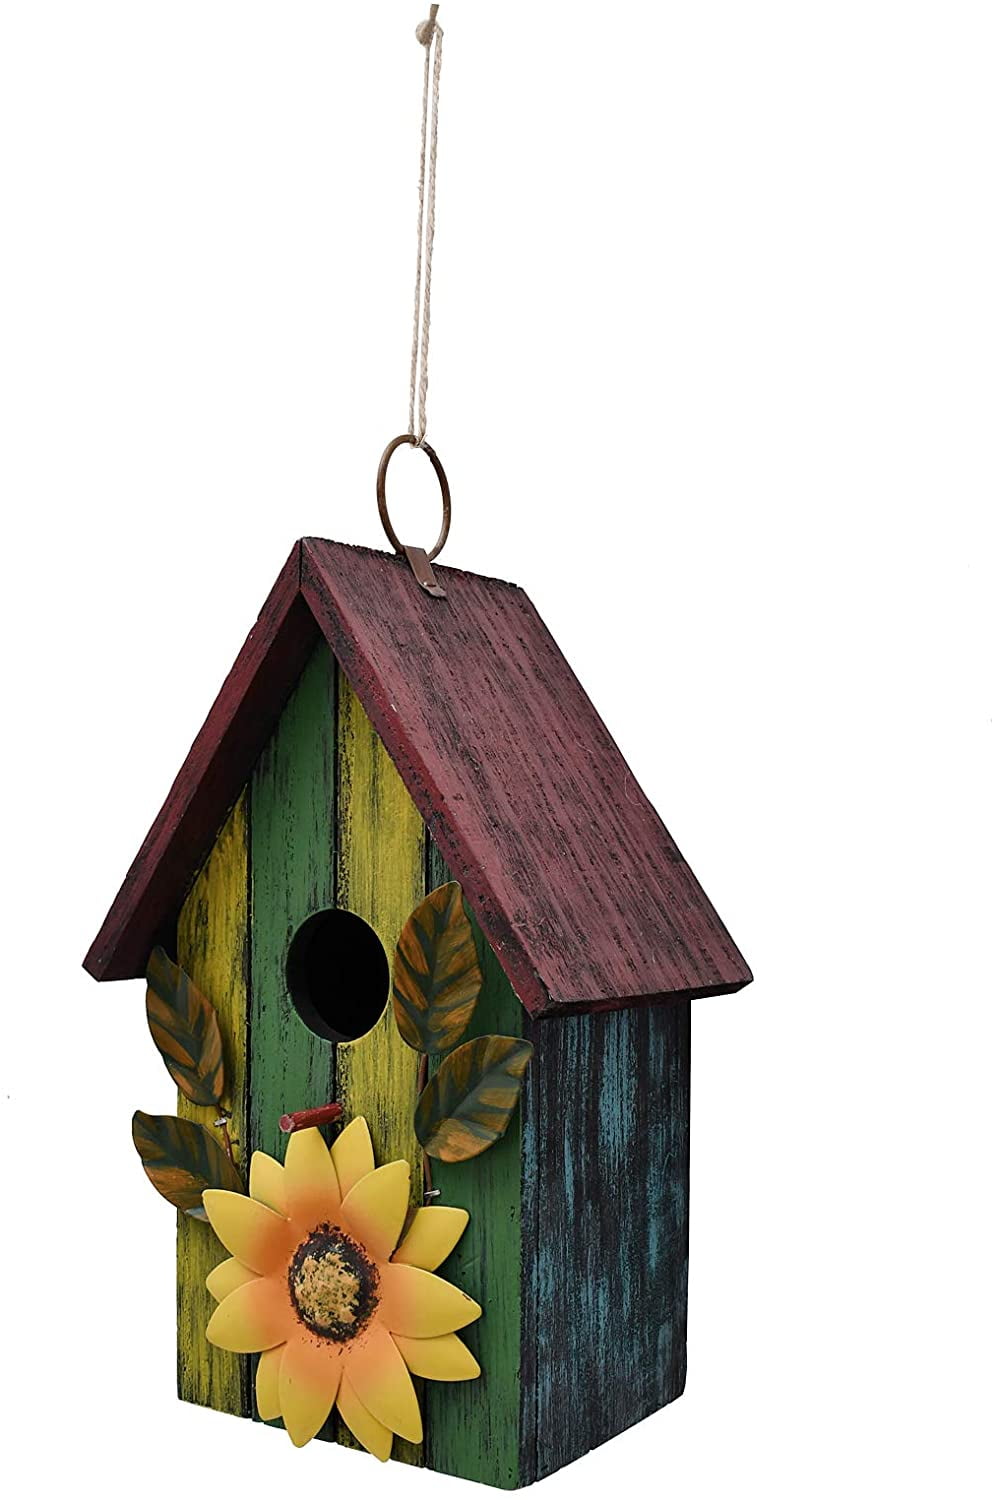 With A Metal Sunflower Opening & Metal Roof Design. Birdhouse Unfinished Wood 